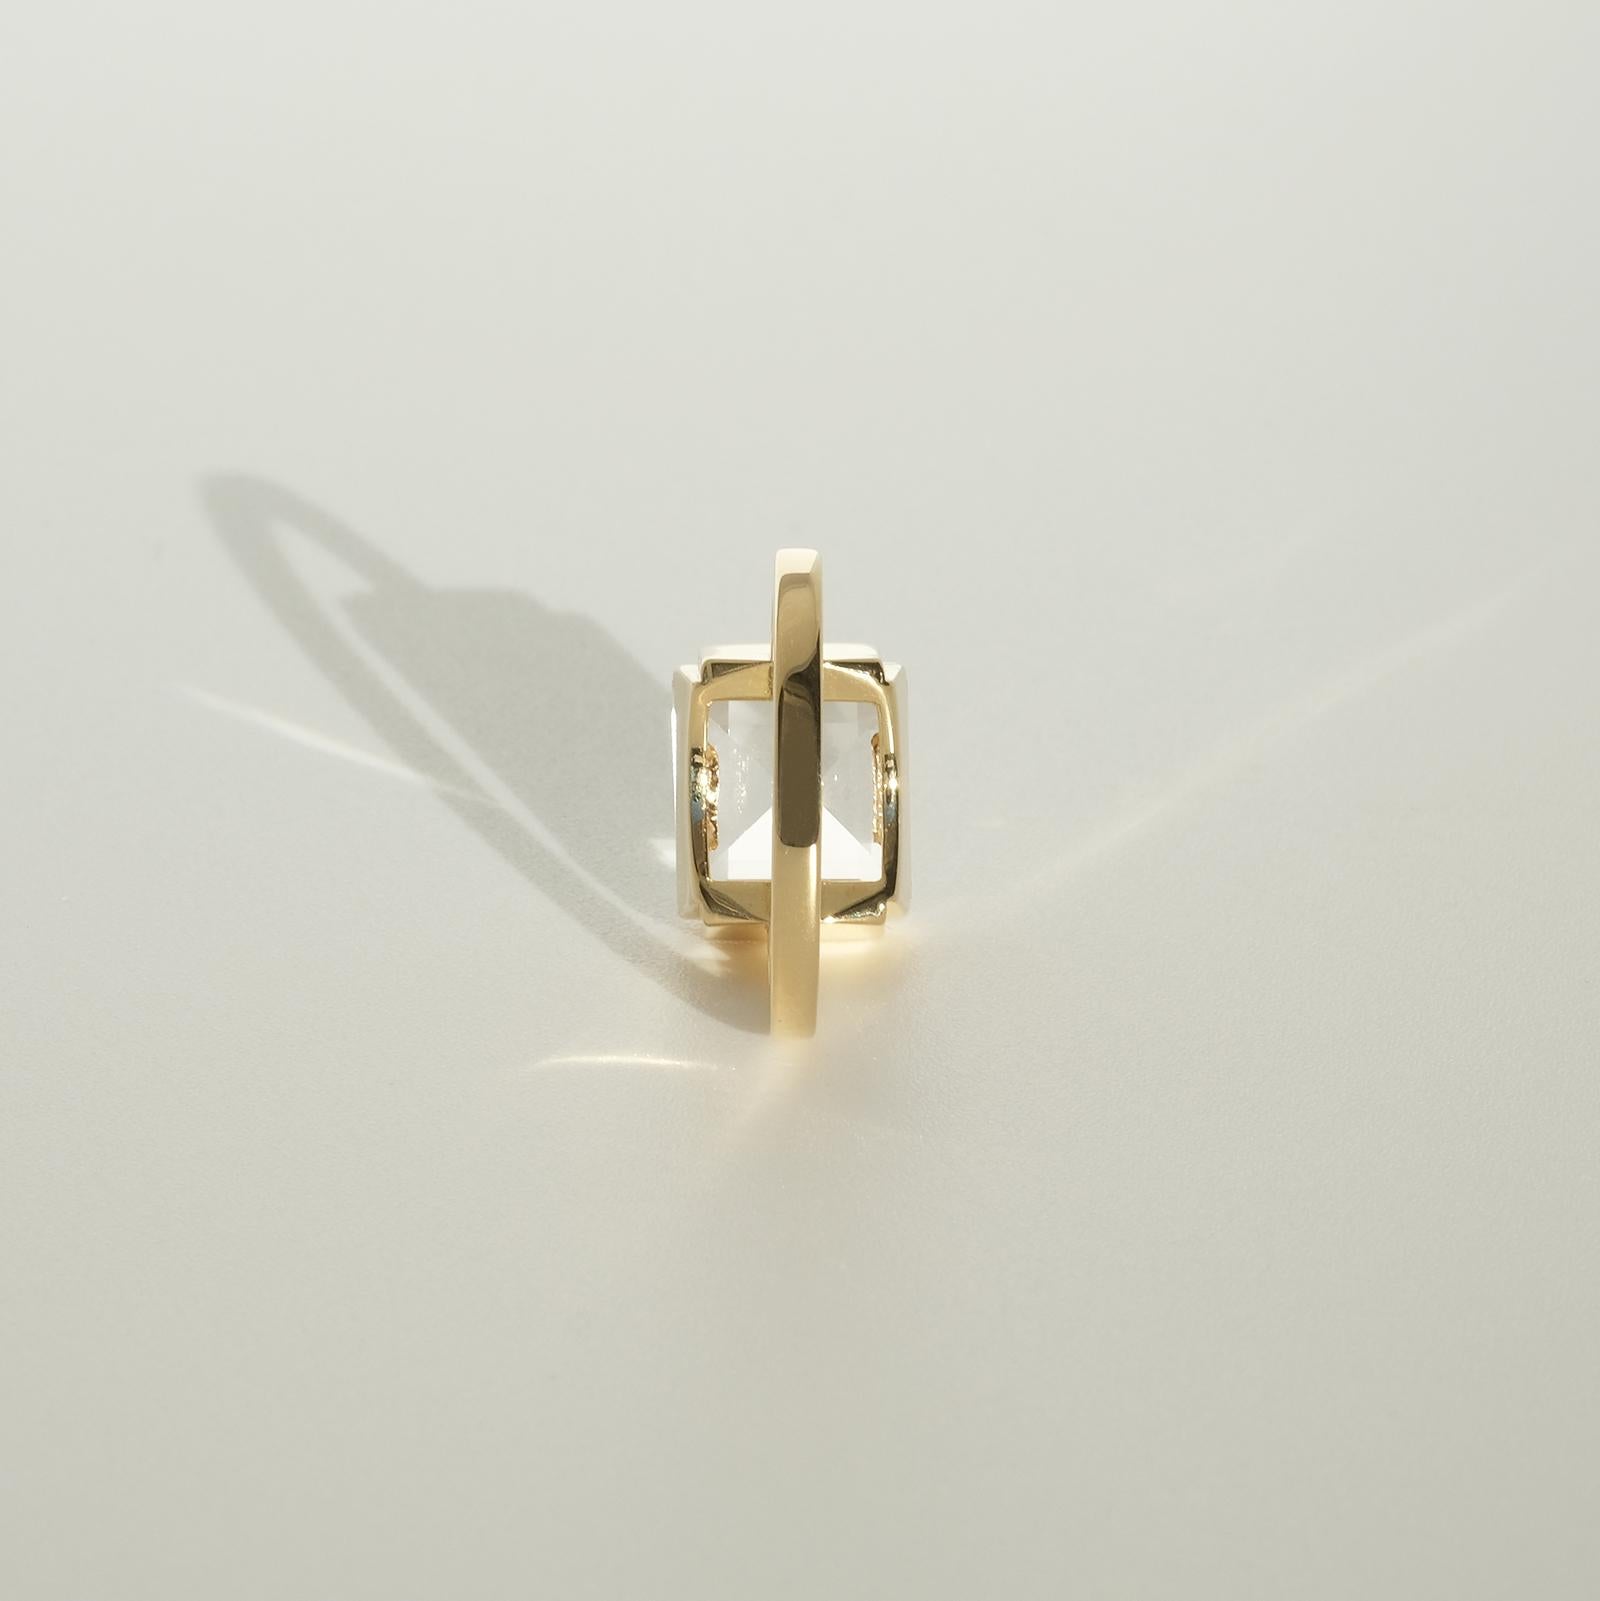 This 18 karat gold and rock crystal ring has a square faceted rock crystal and a stair shaped setting. The ring, with its geometric and stylish forms, shows upon typical Wiwen Nilsson characteristics. 

The ring radiates class and style and fits